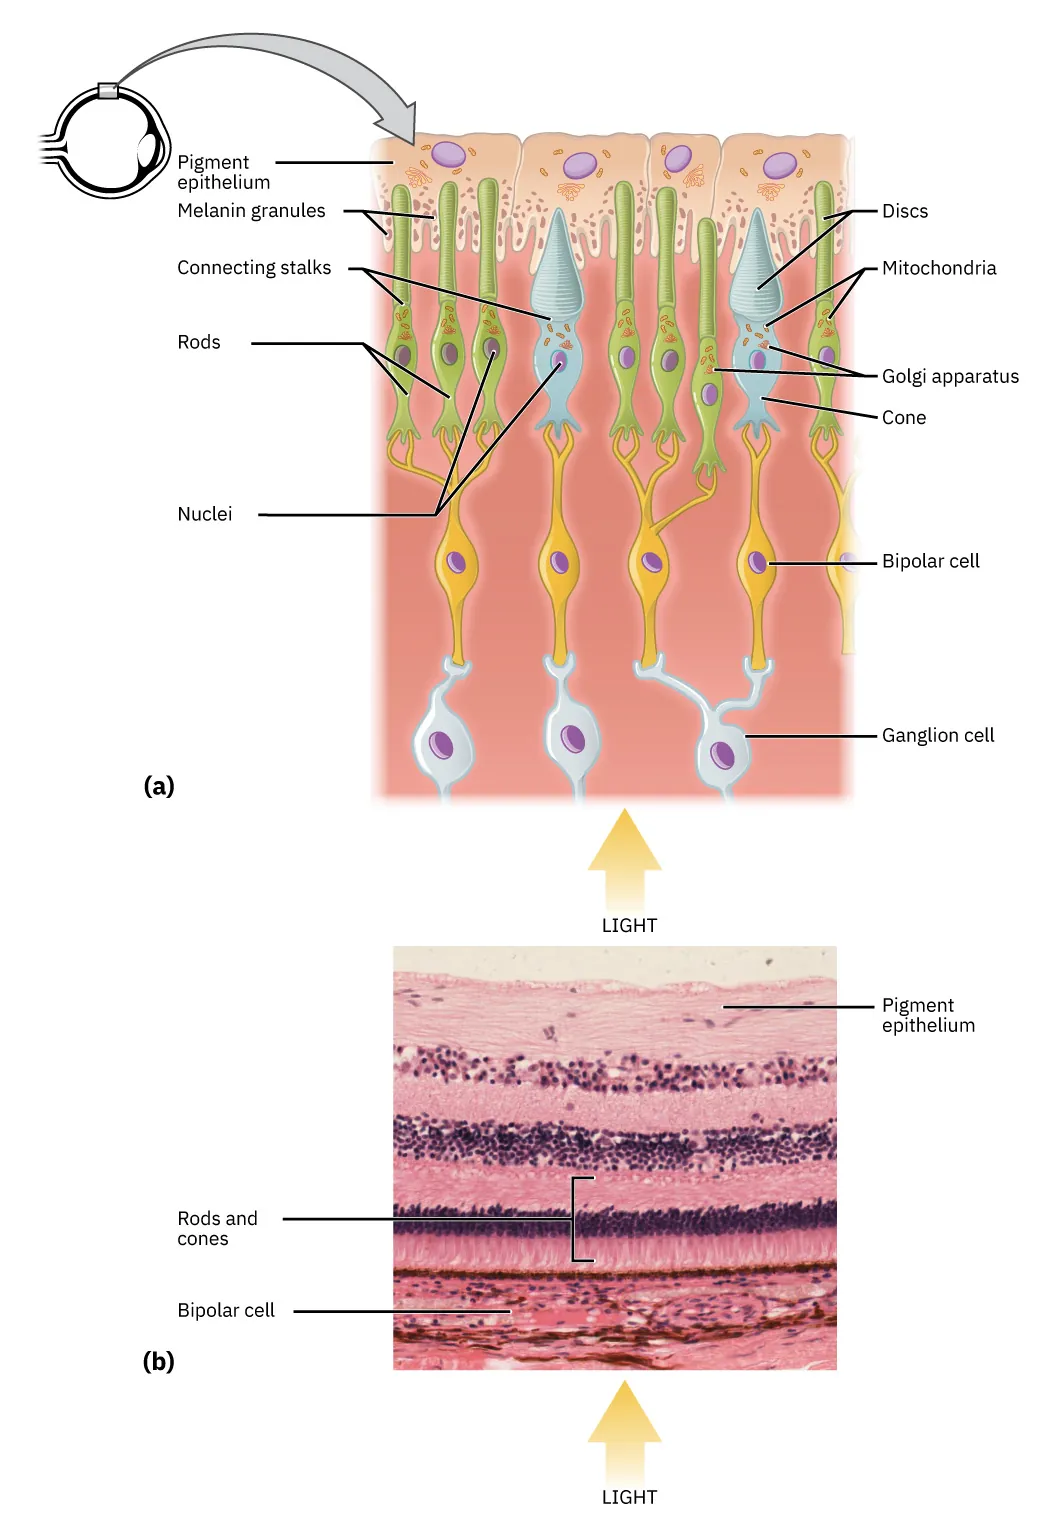 The top panel shows the cellular structure of the different cells in the eye. The bottom panel shows a micrograph of the cellular structure.